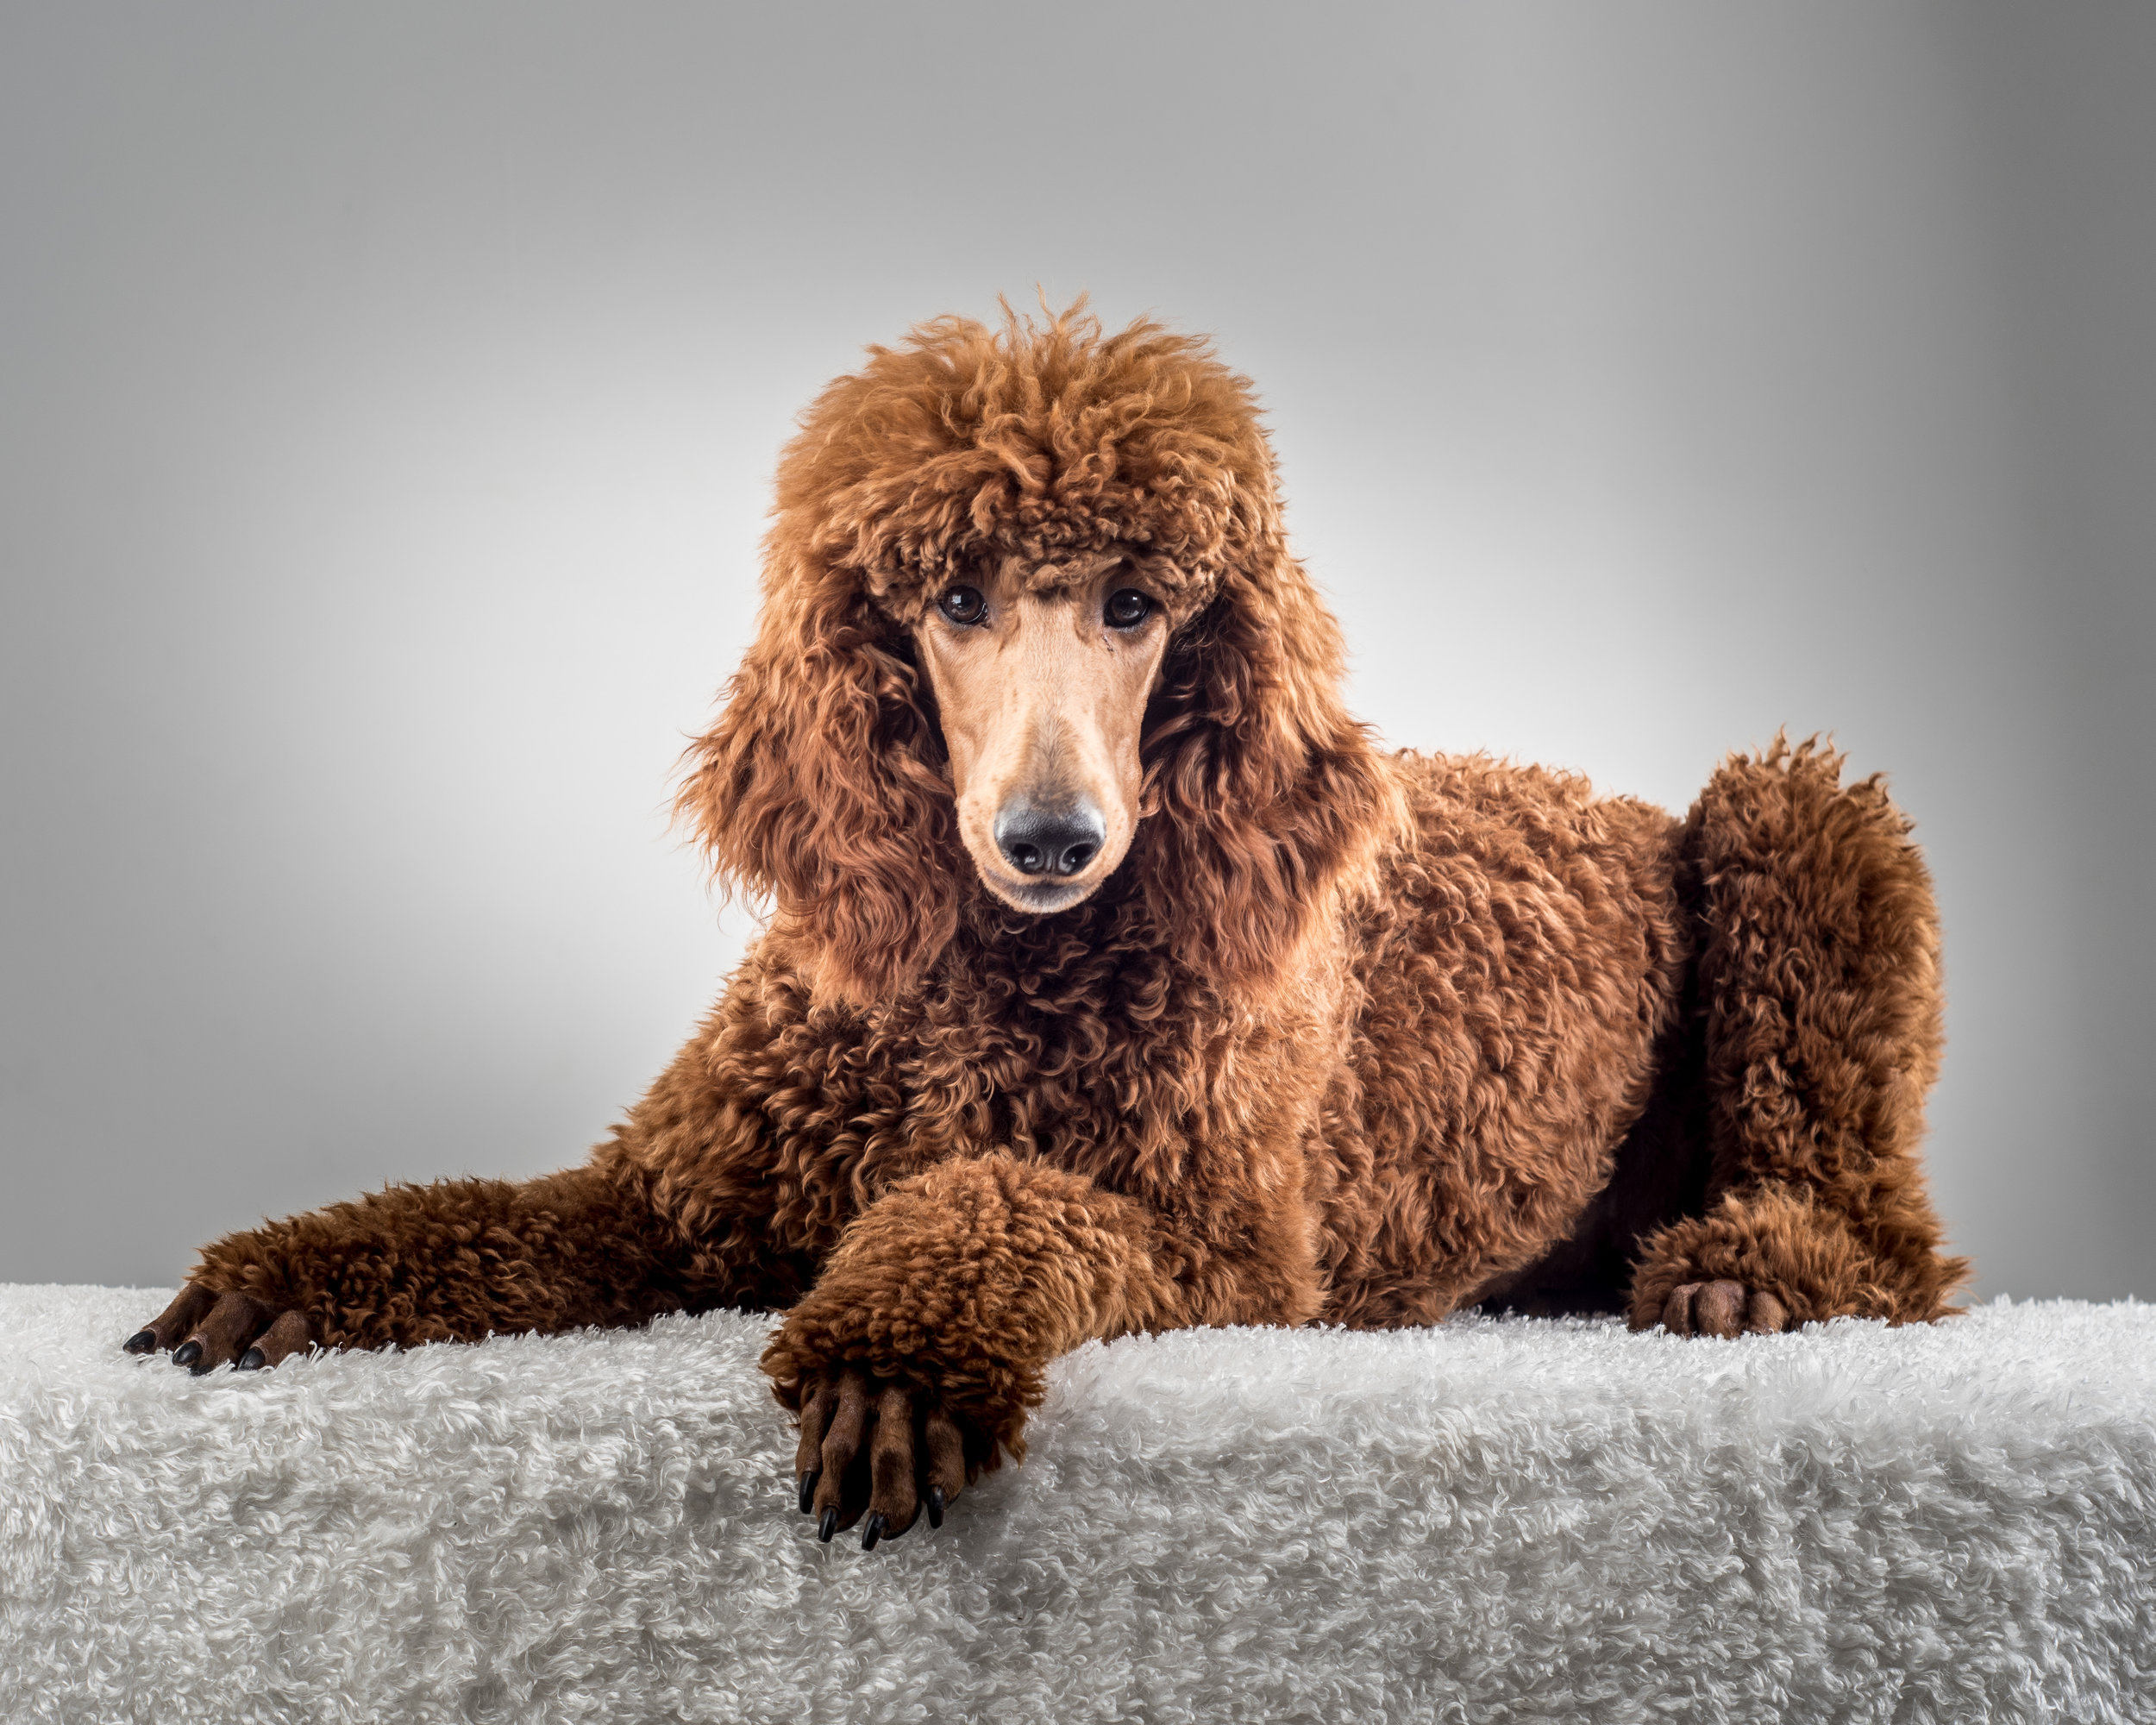 Standard Poodles In Backyard Stock Photo - Download Image Now - iStock